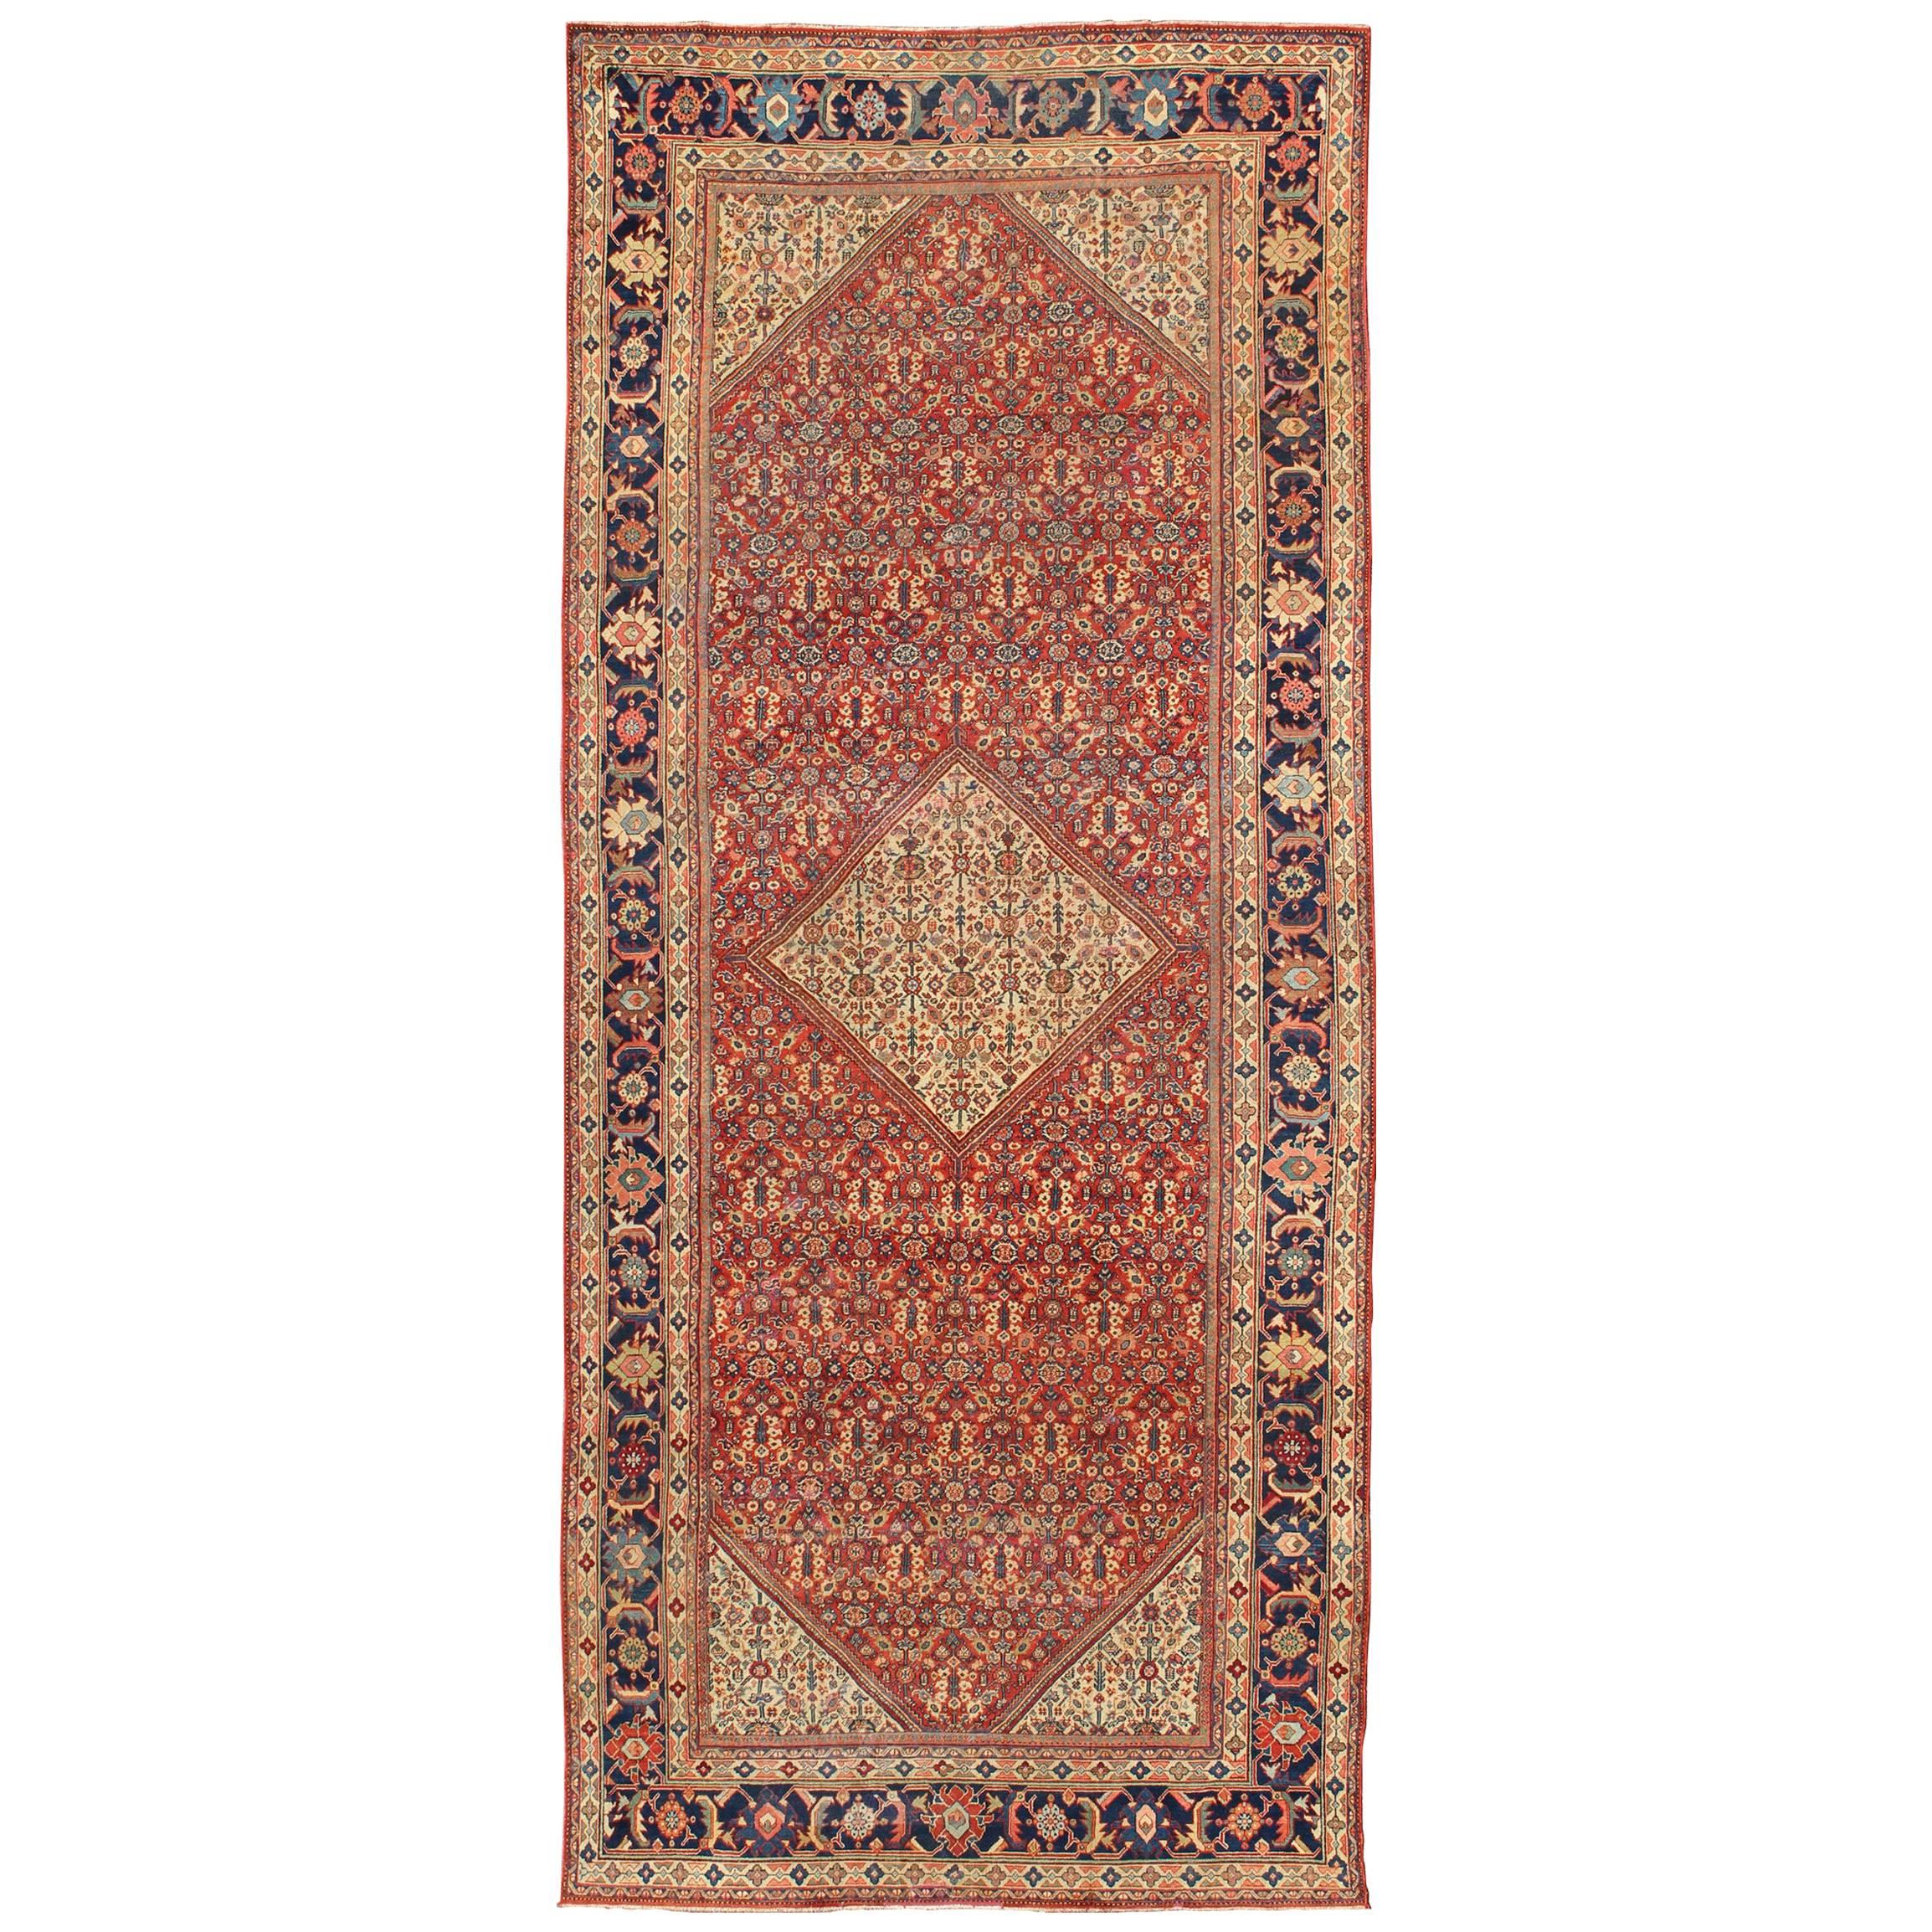 Antique Persian Sultanabad Large Gallery Rug with Sub-Geometric Motifs